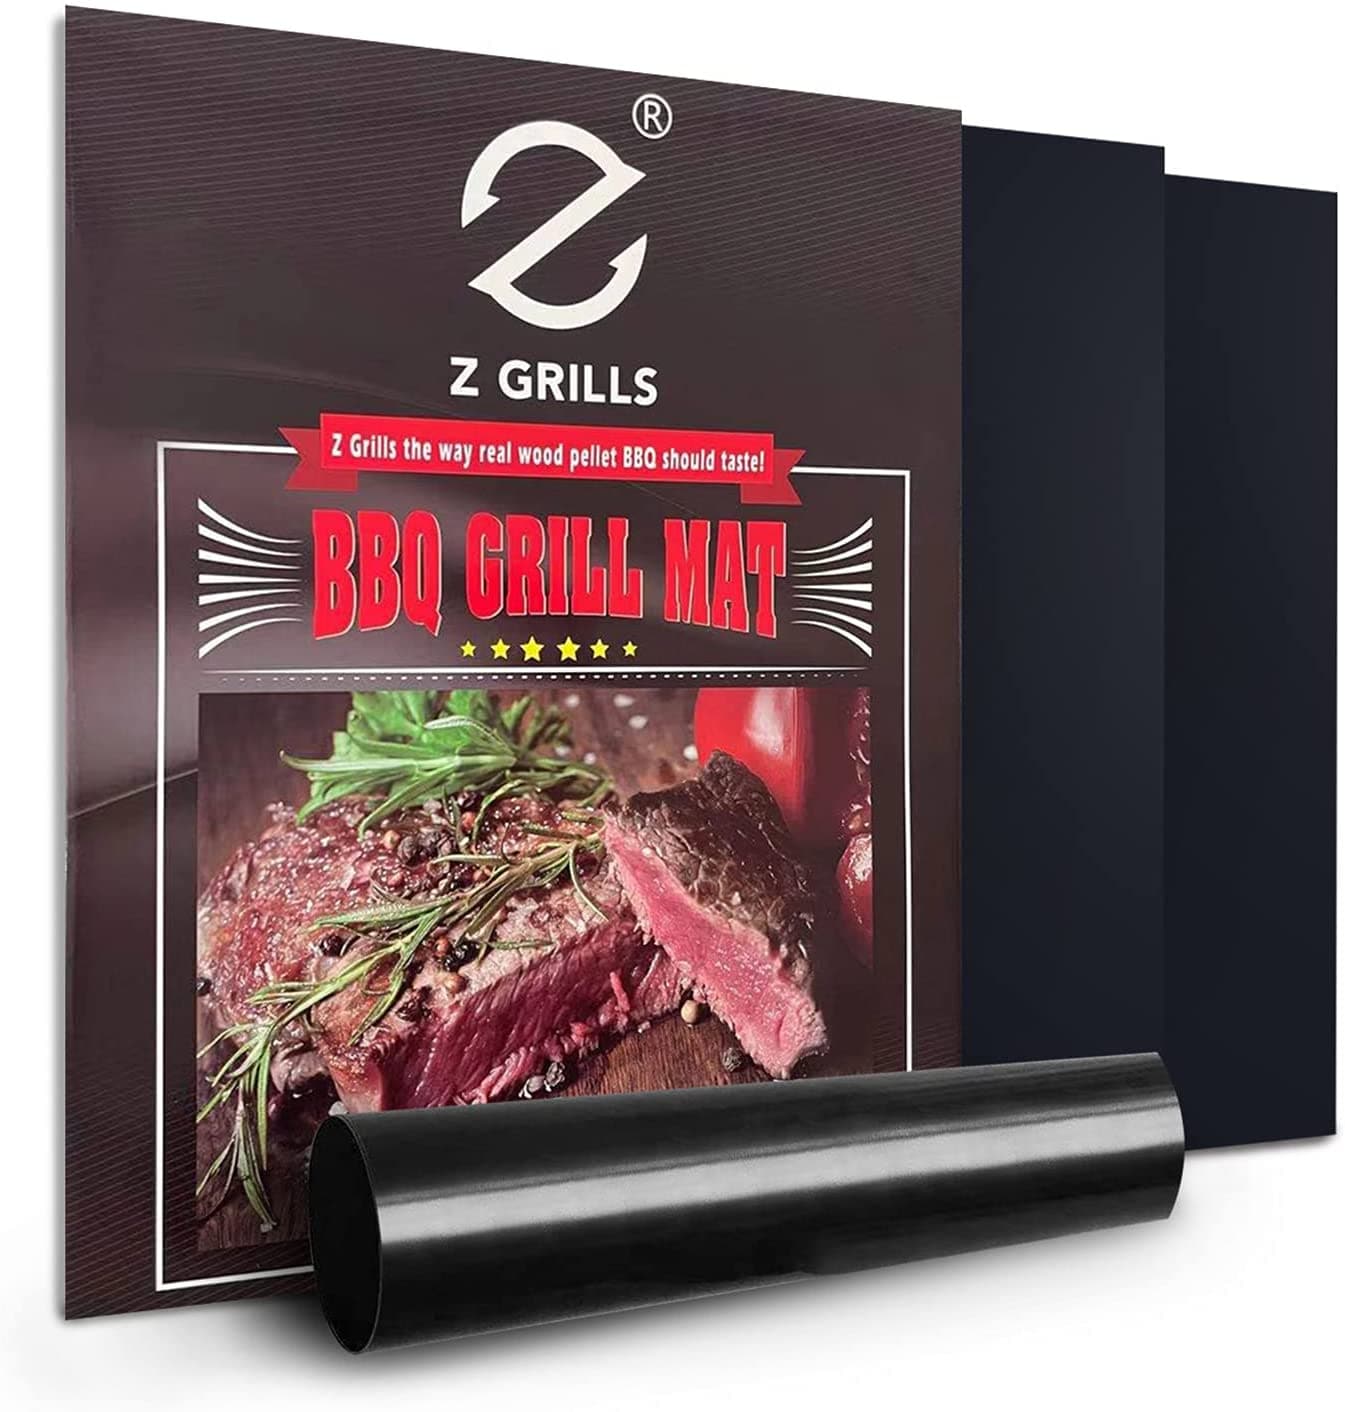 BBQ grill mat，3 Pack with 2 Silicone BBQ Brushes,Size 13" x 16" 